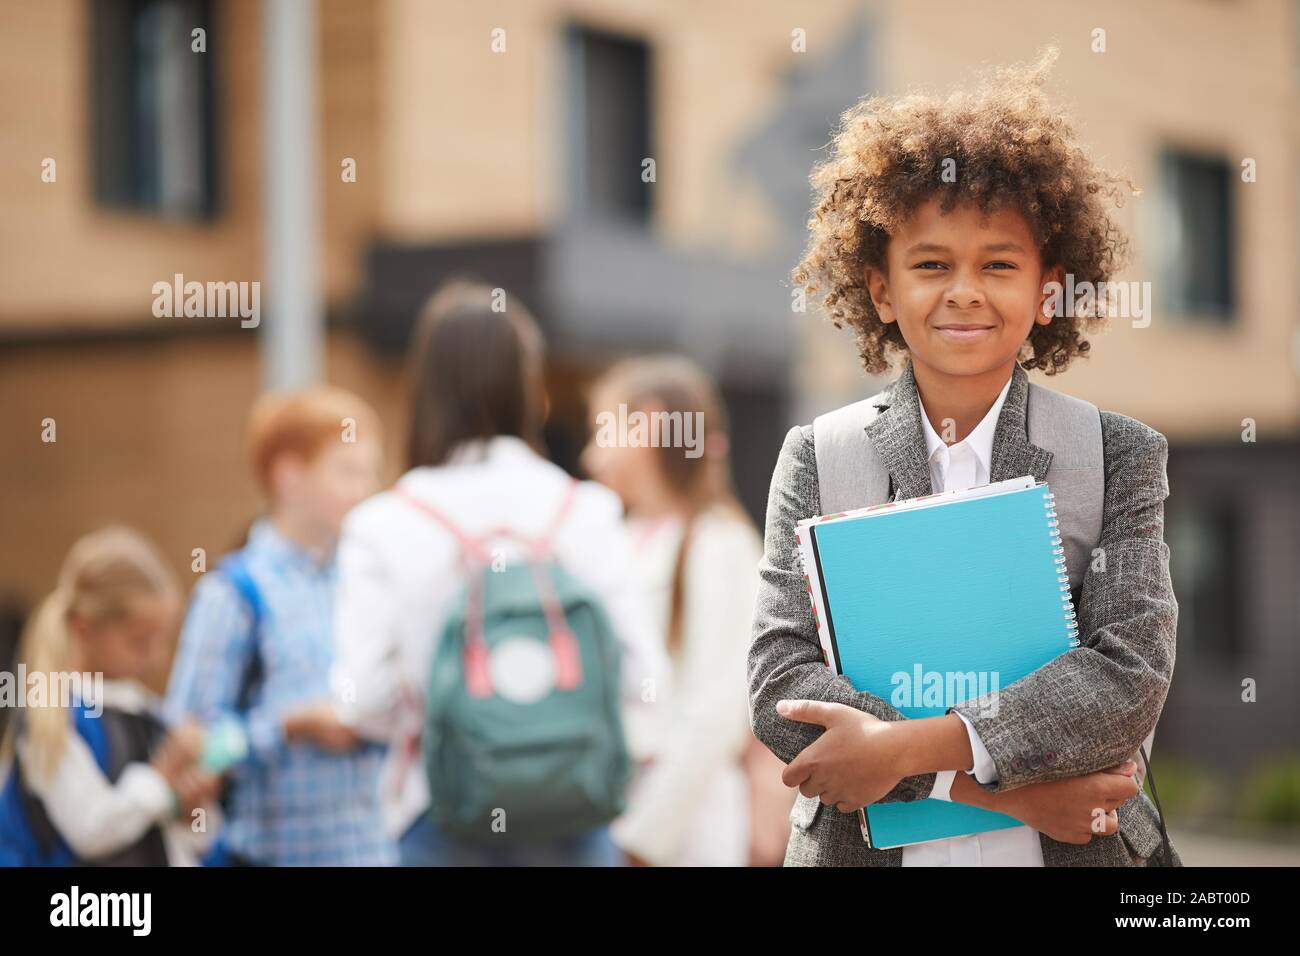 Portrait of African schoolboy with curly hair holding textbooks and smiling at camera while standing outdoors Stock Photo